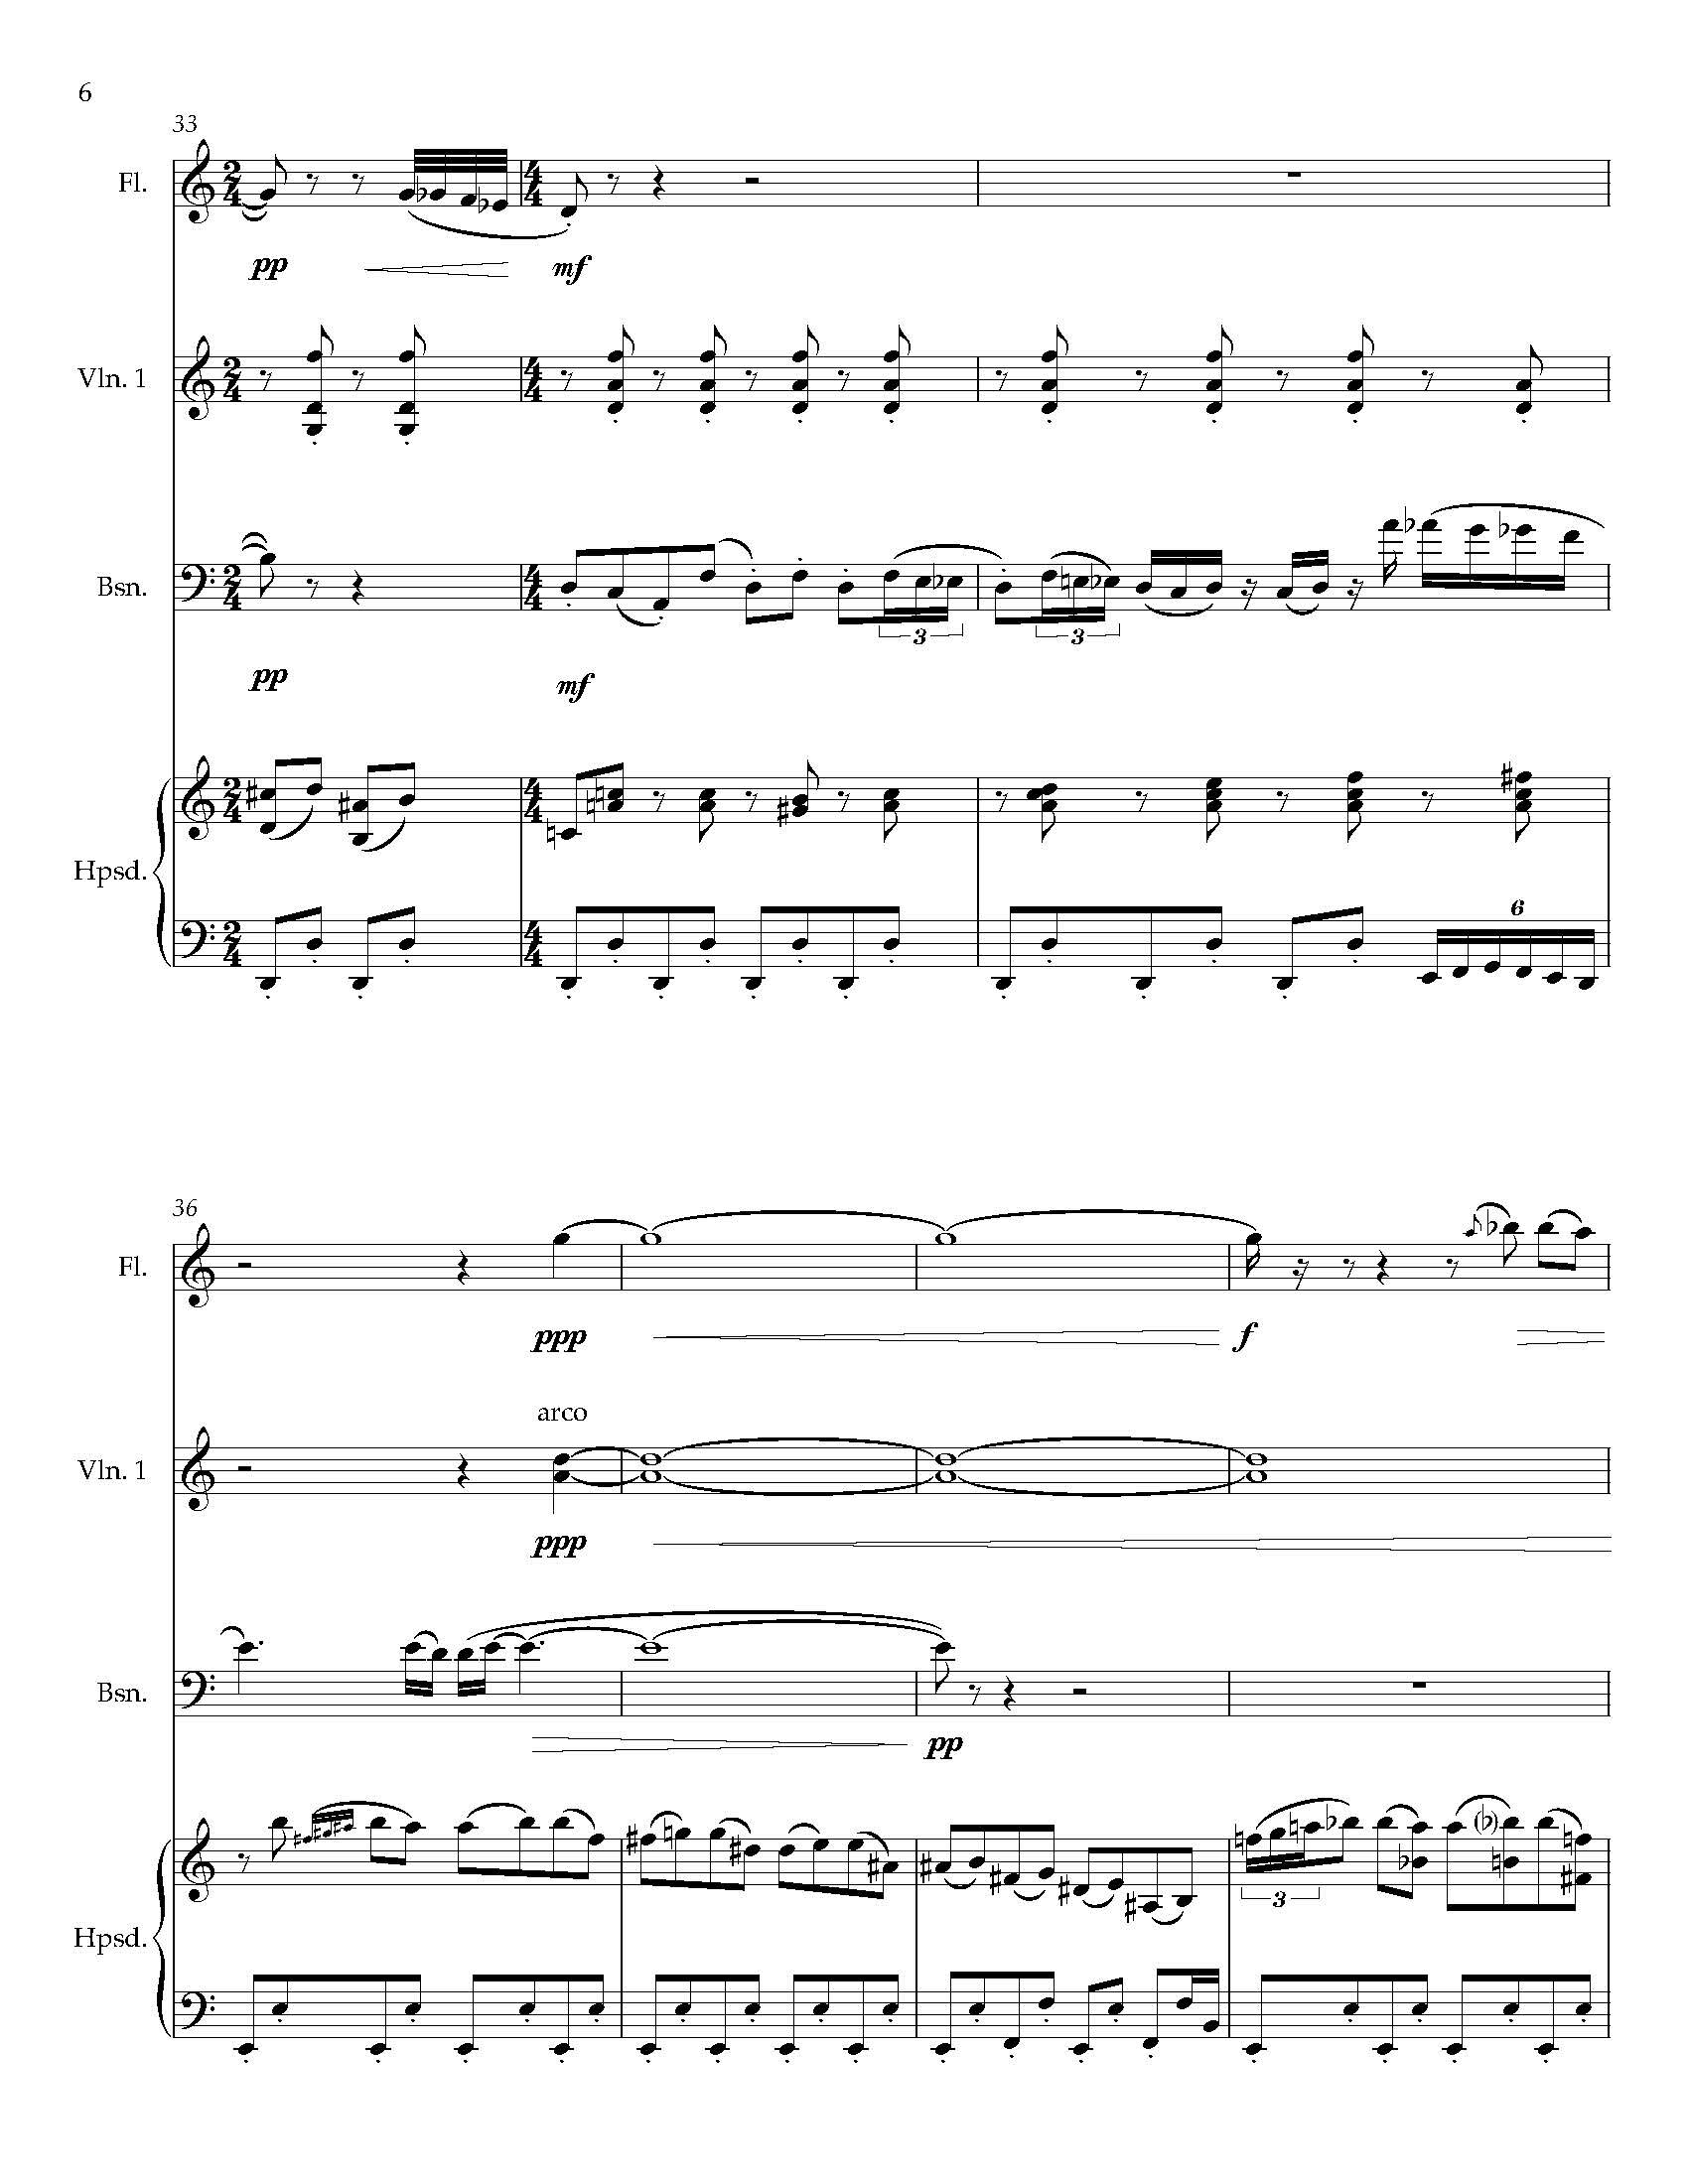 The Hourglass Equation - Complete Score_Page_12.jpg